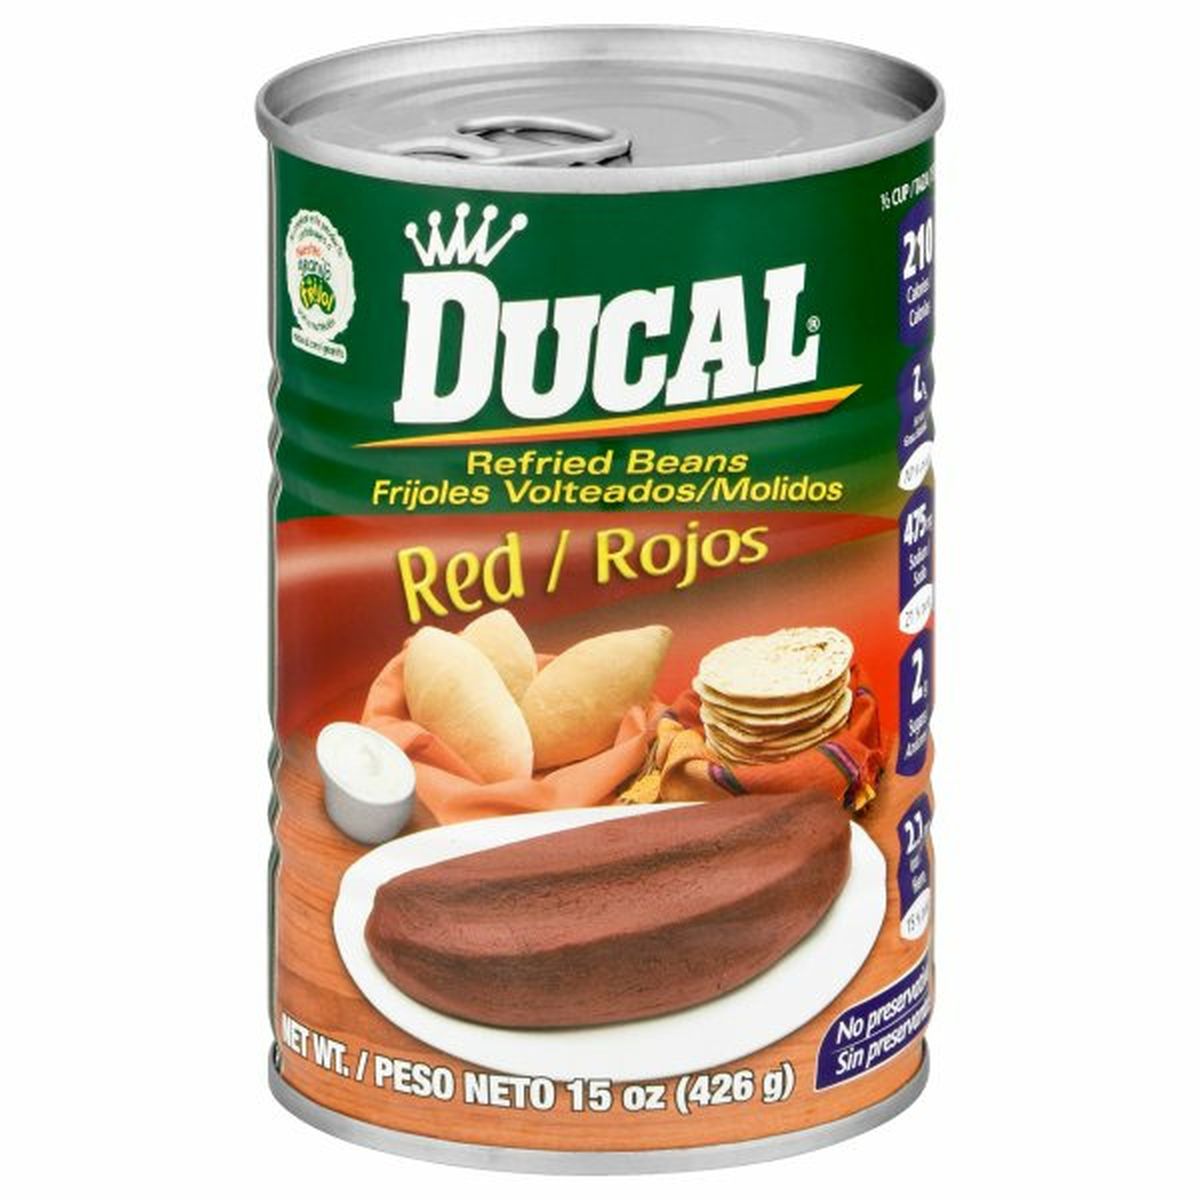 Calories in Ducal Beans, Refried, Red